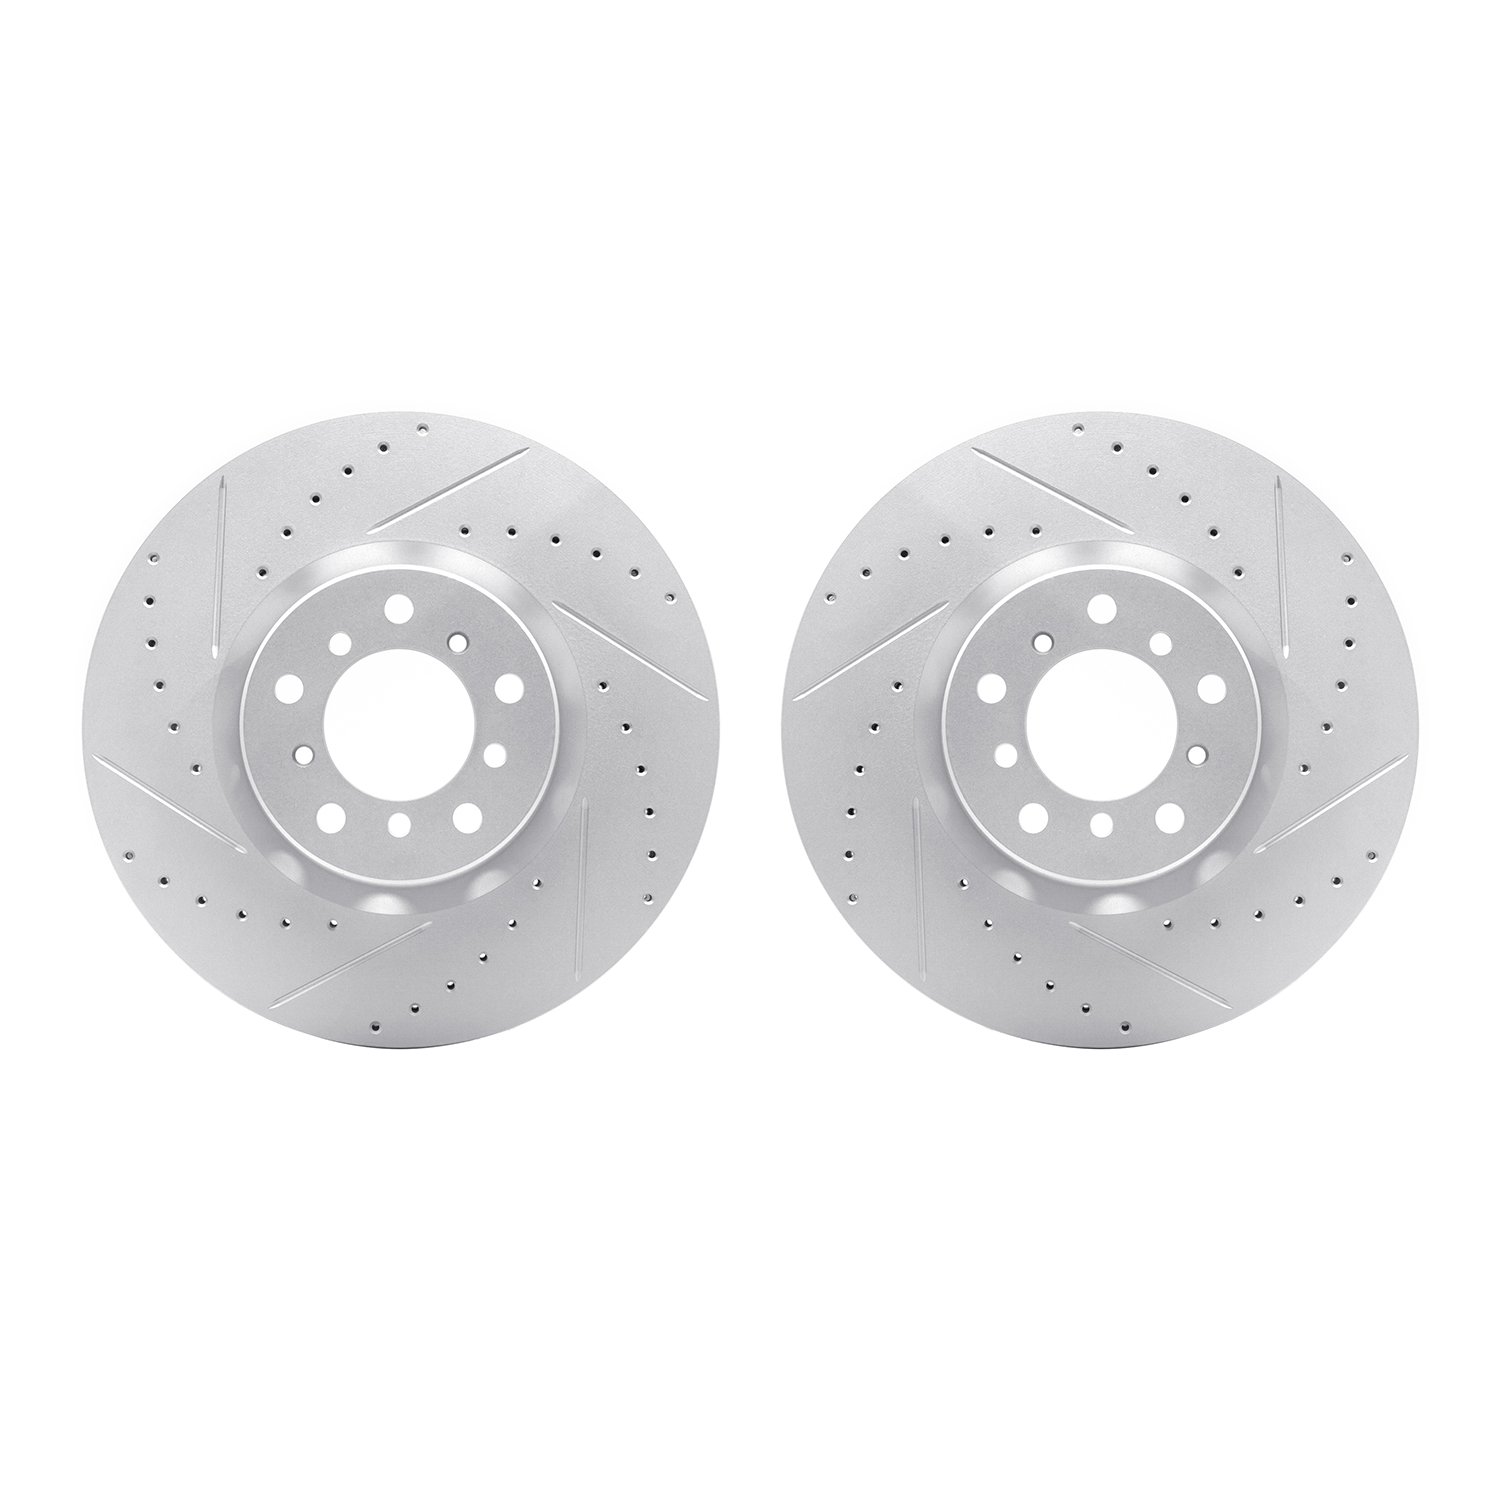 2002-31039 Geoperformance Drilled/Slotted Brake Rotors, 2000-2003 BMW, Position: Front